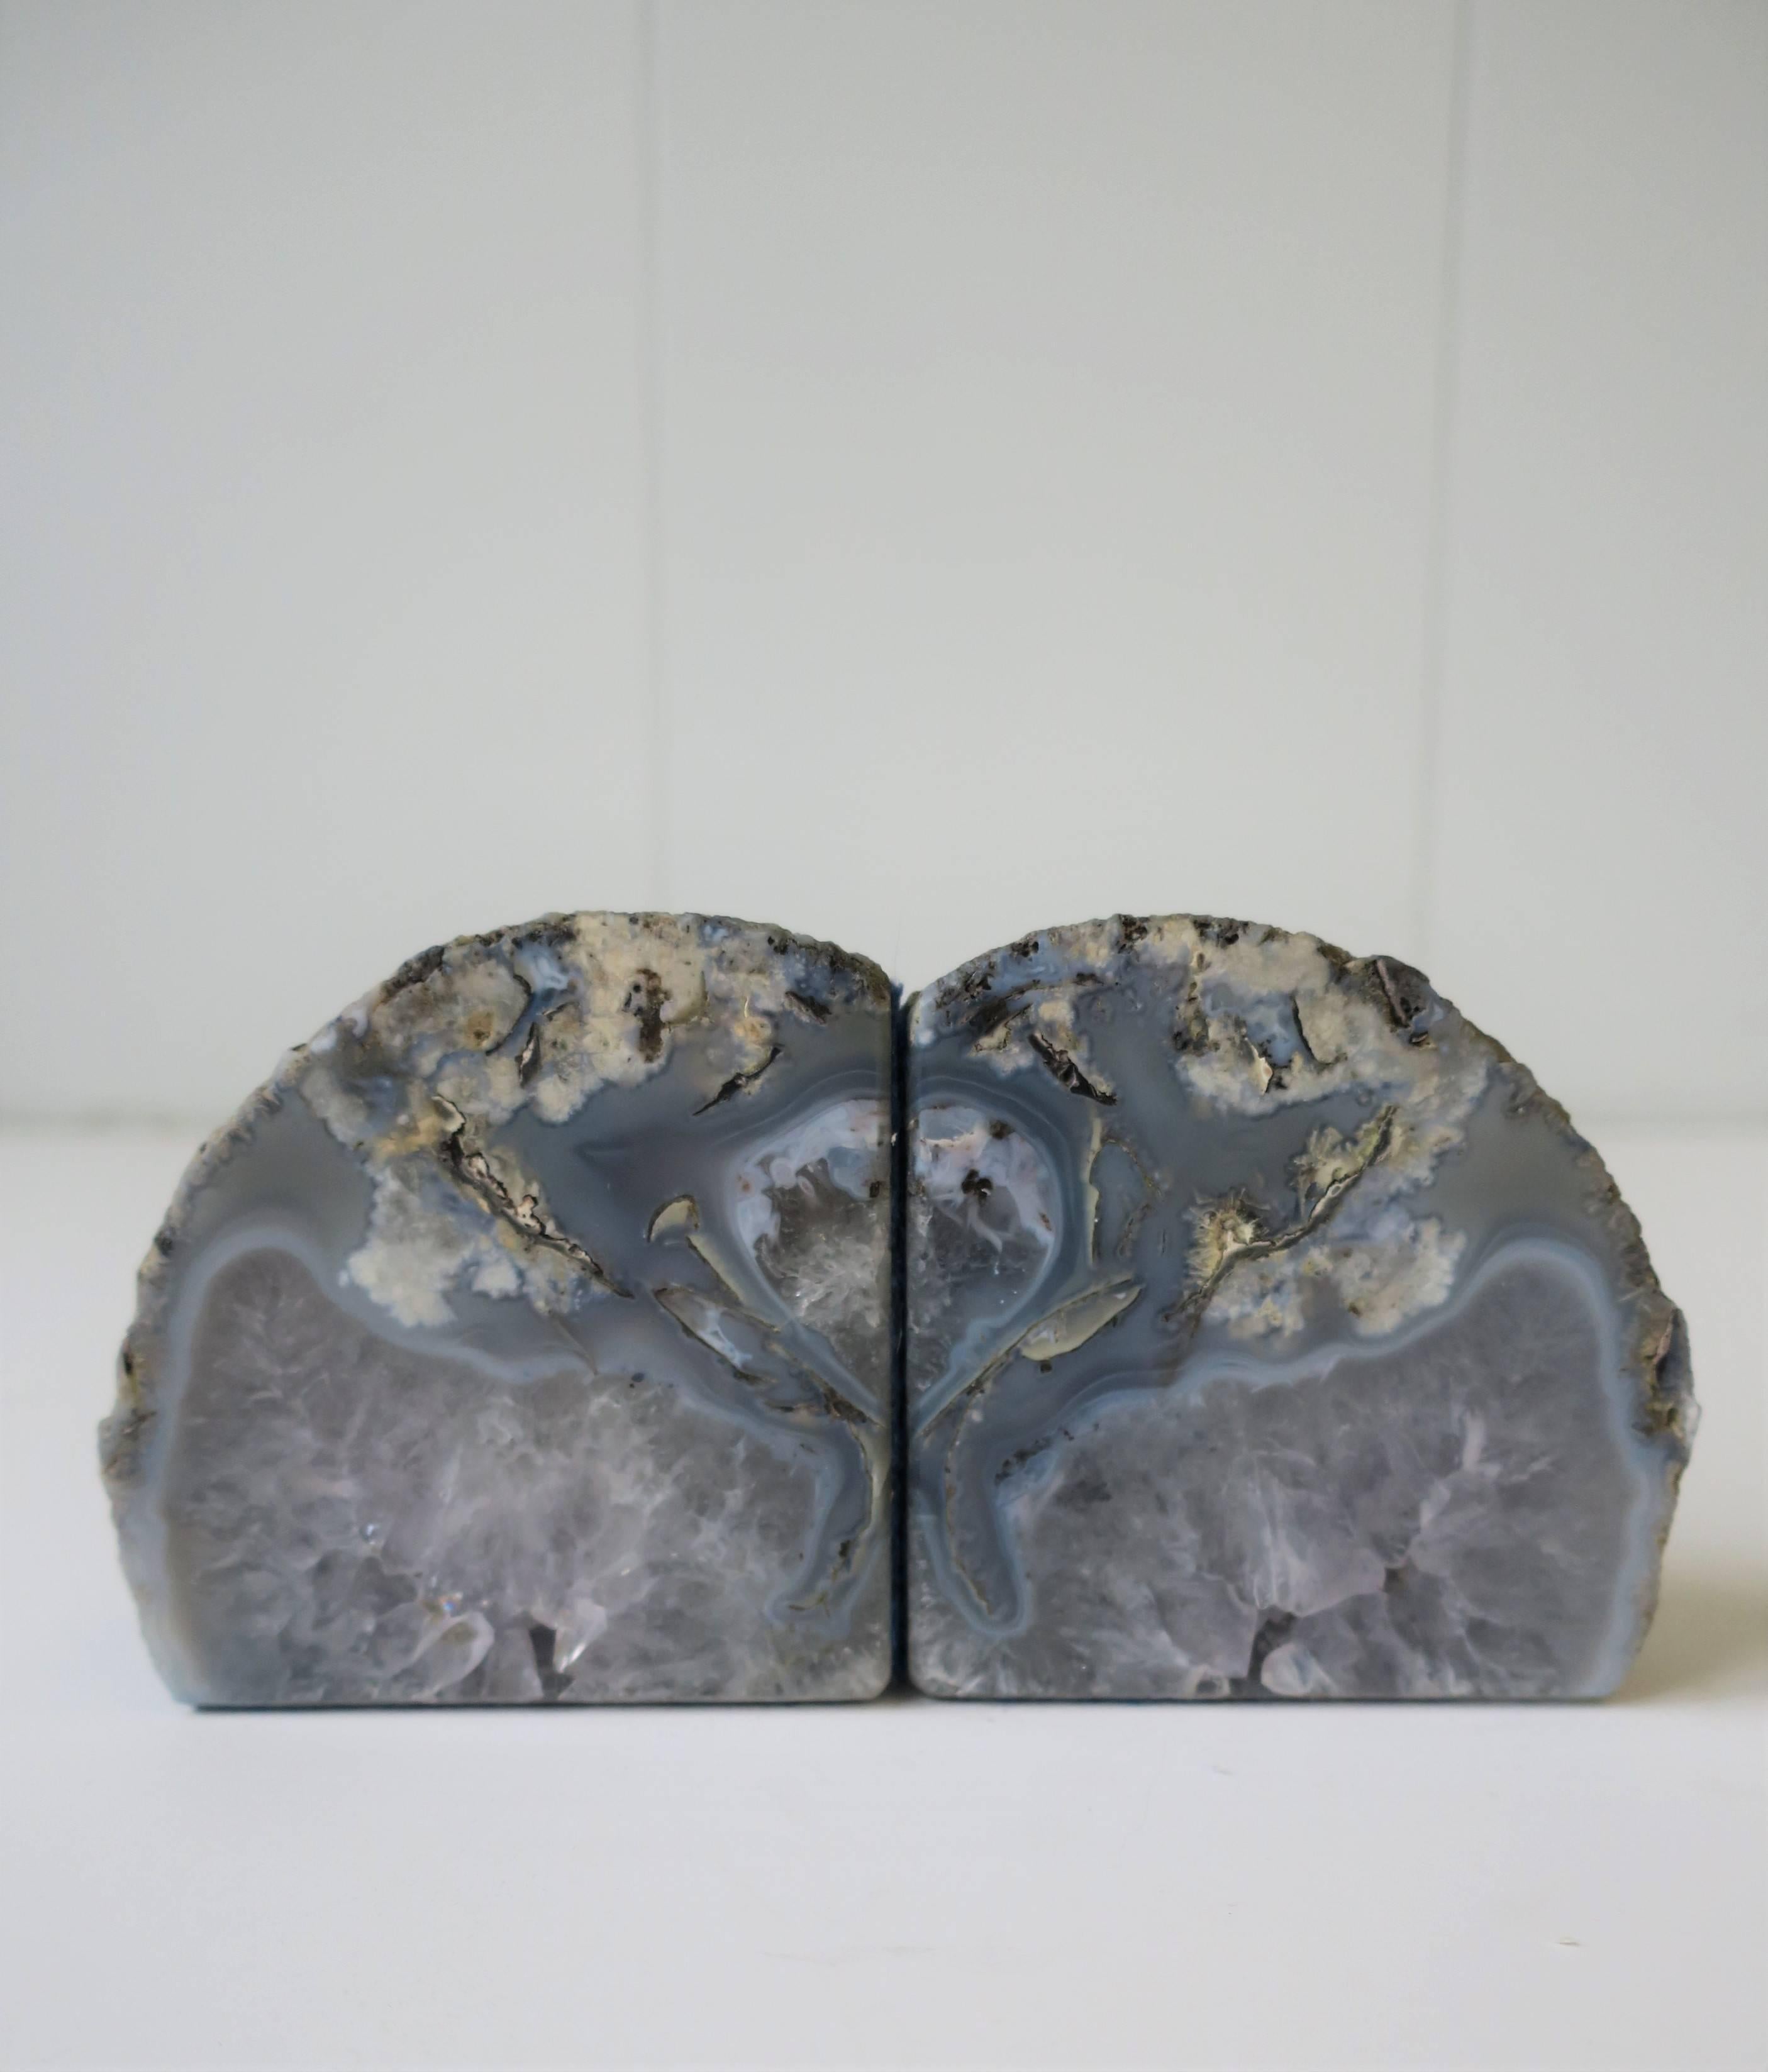 A beautiful pair of blue and white natural agate/rock crystal bookends or decorative objects. These agate/rock crystals work well on a bookshelf or equally well as stand alone objects as show in images 4 and 5. Protective blue felt bottom on two